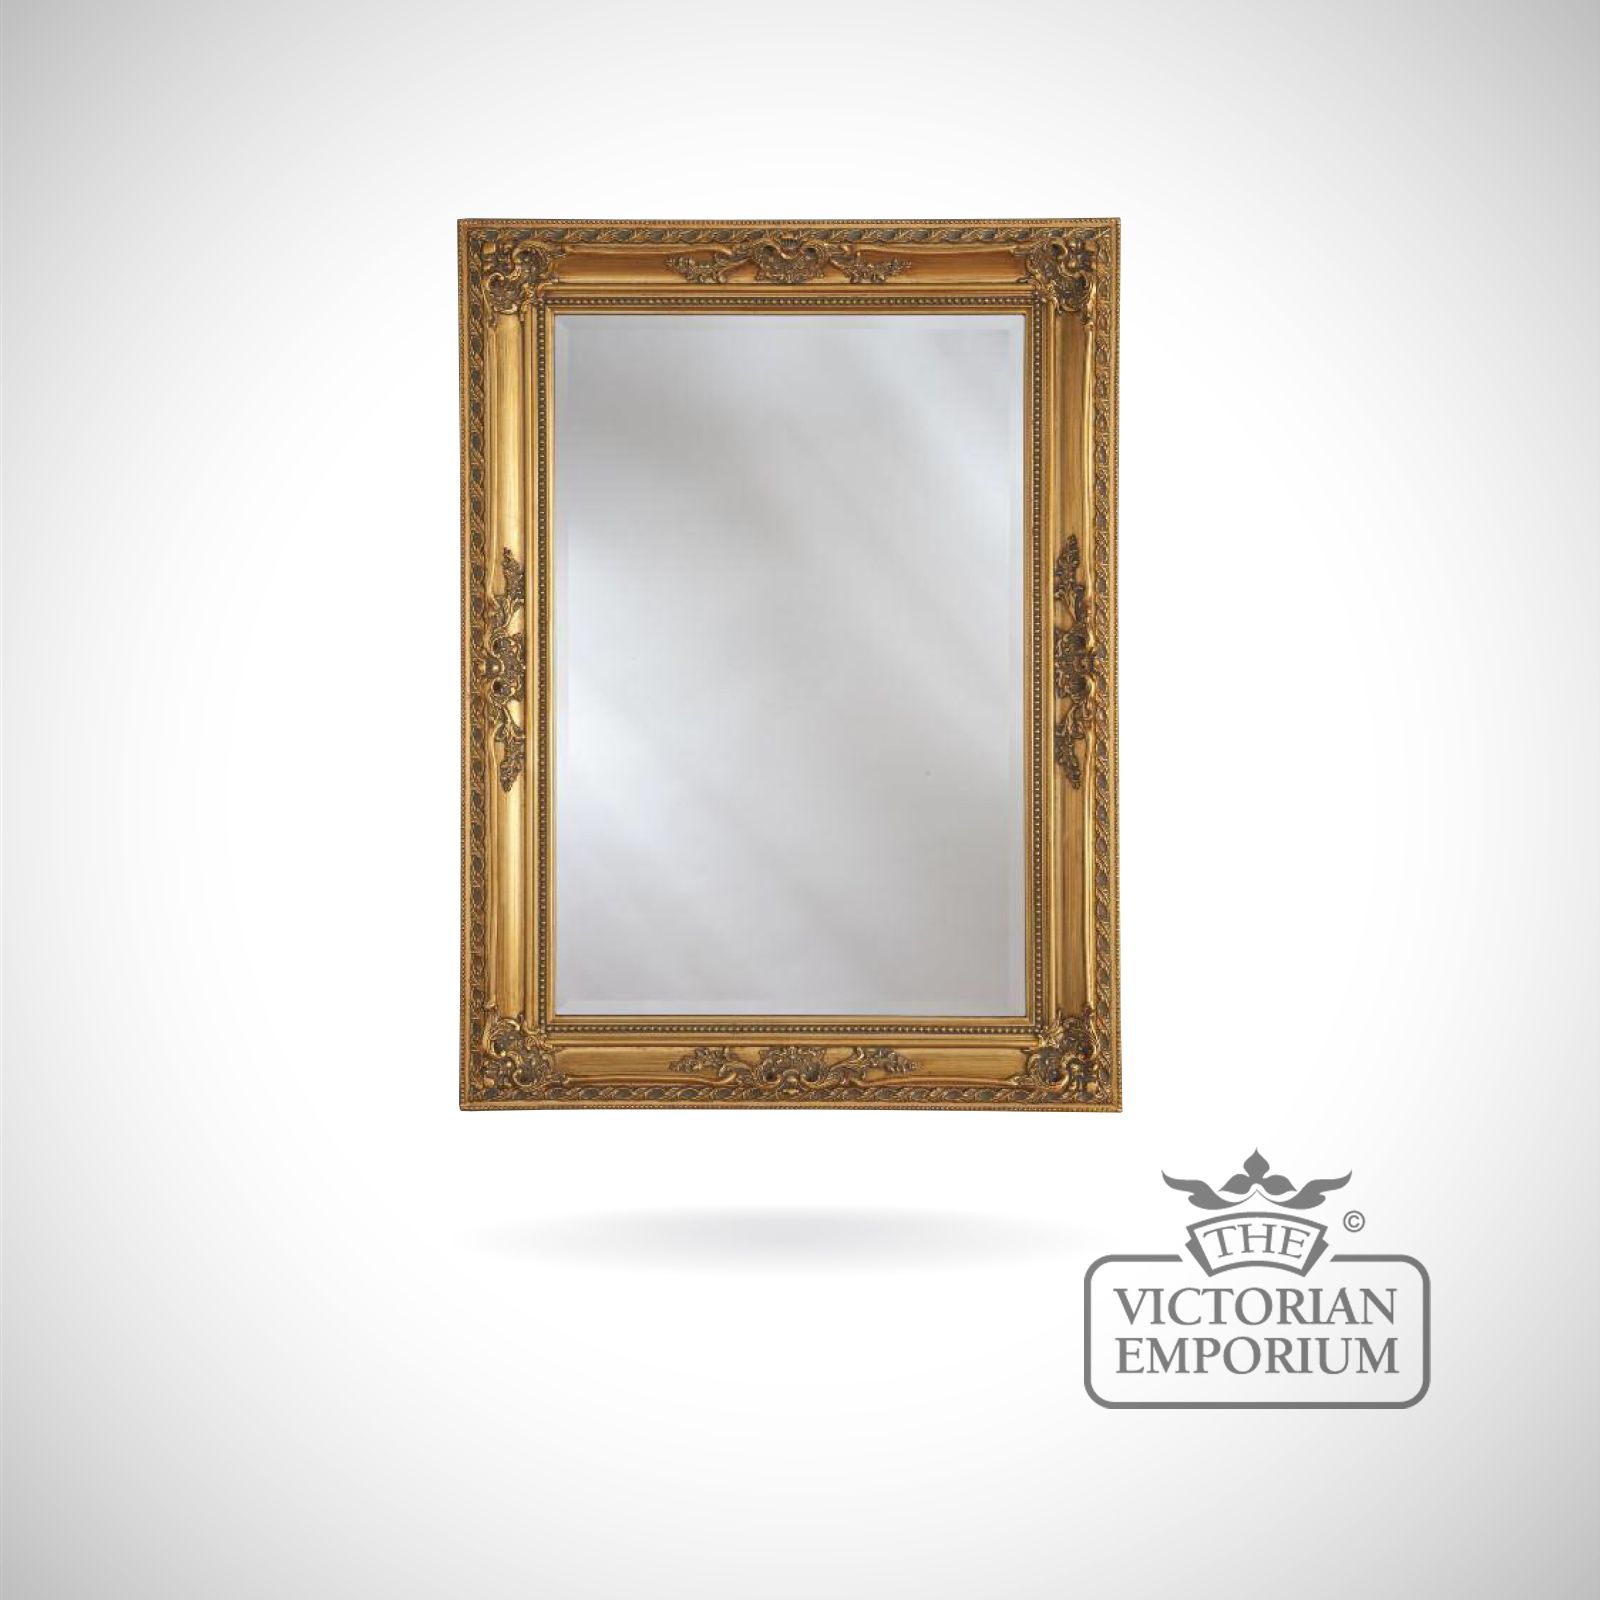 Oxford Mirror with gold frame - 114 x 84cm